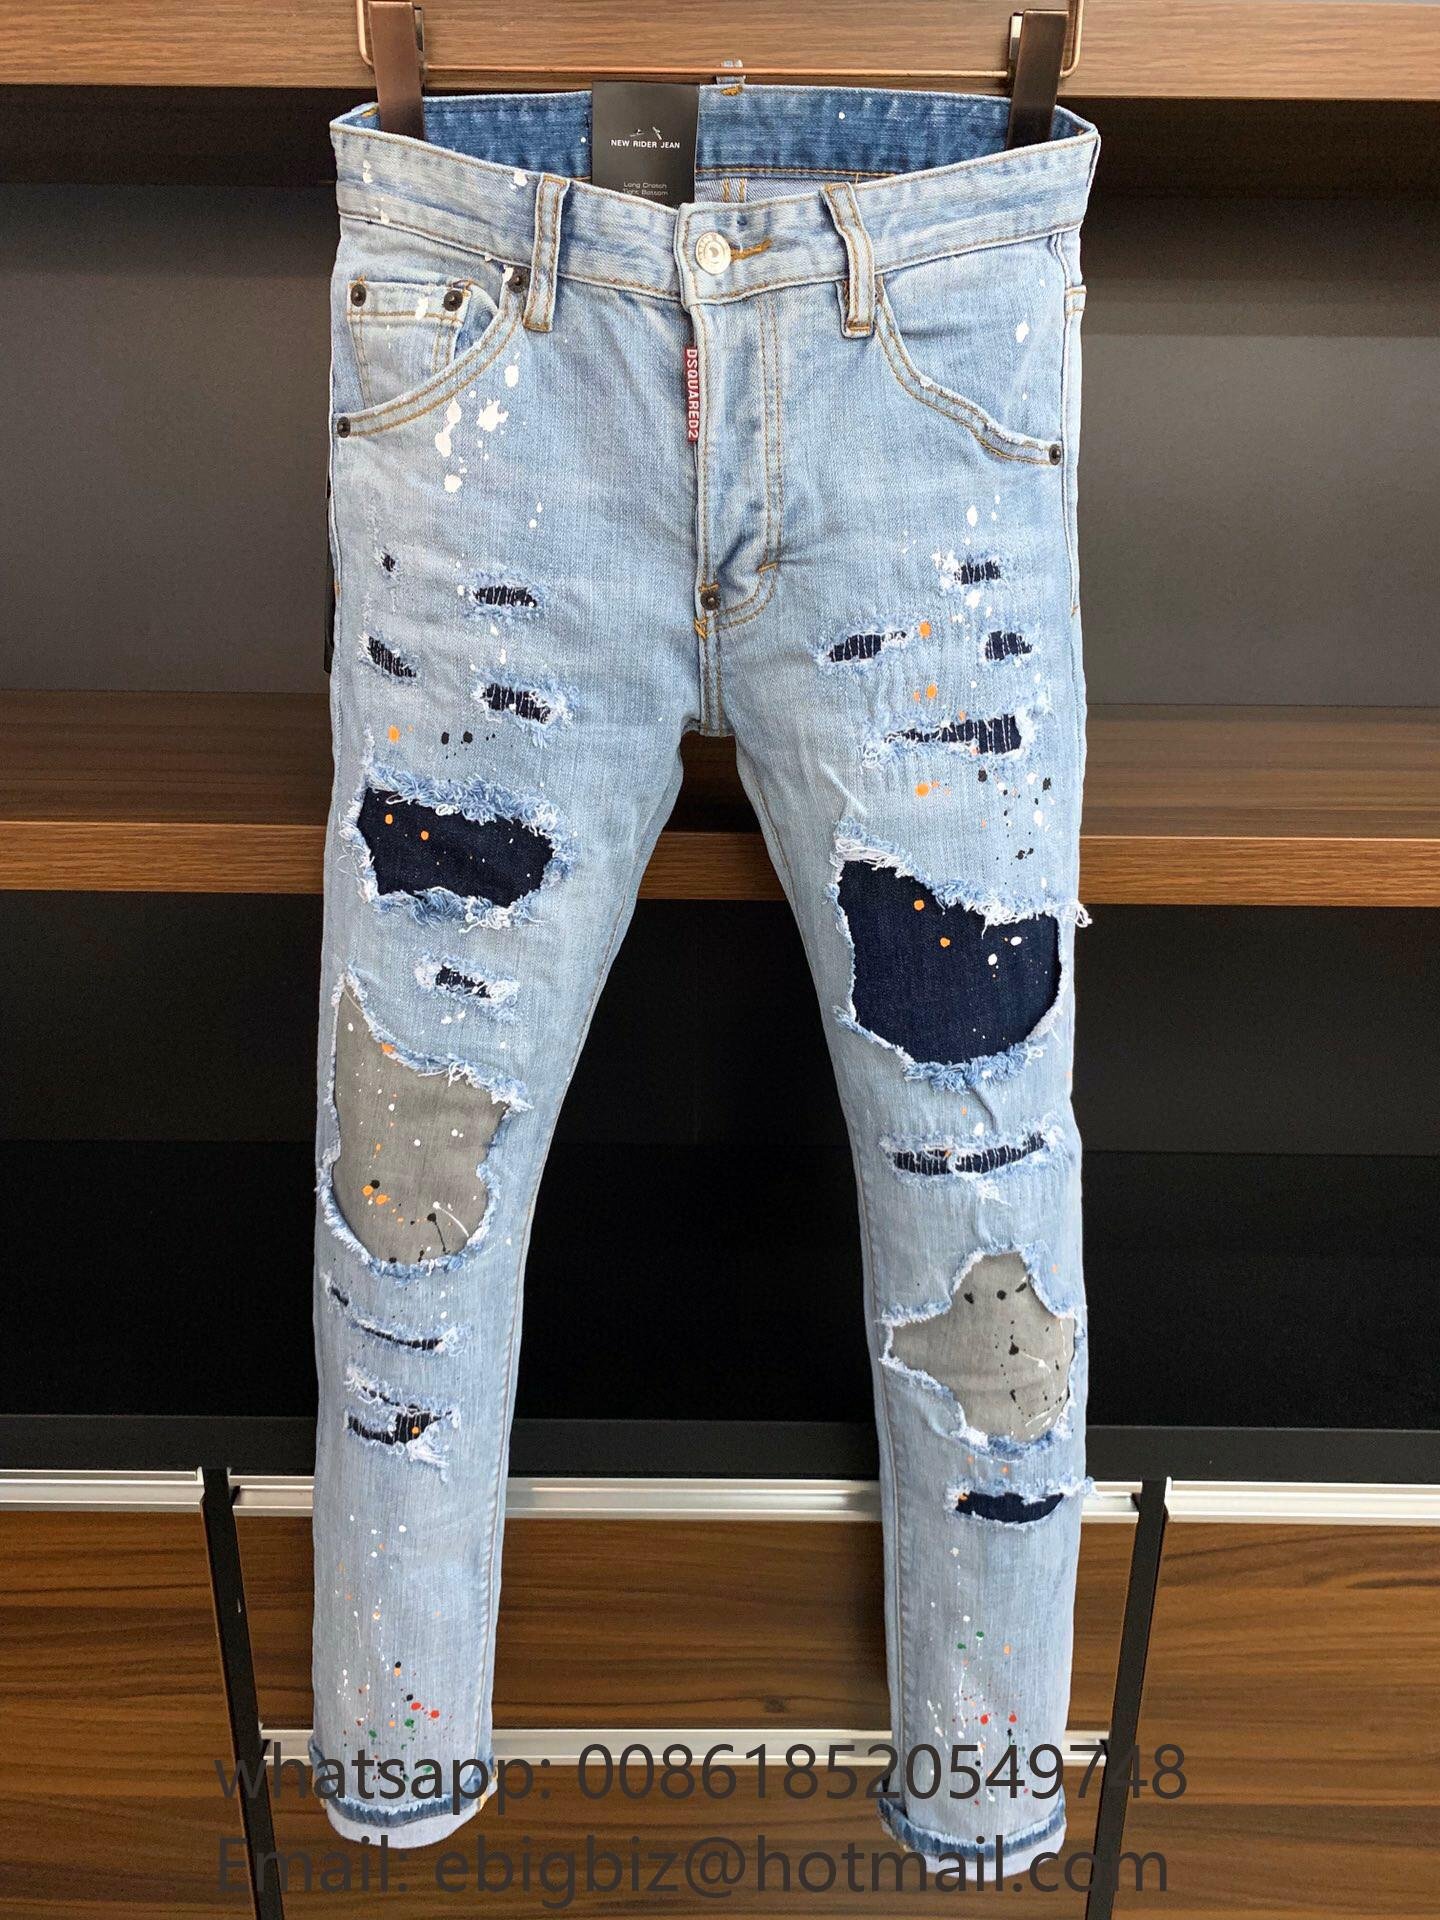 Wholesale Dsquared2 jeans men Cheap DSQUARED Jeans Slim for men Dsquared2  jeans (China Trading Company) - Overcoat - Apparel & Fashion